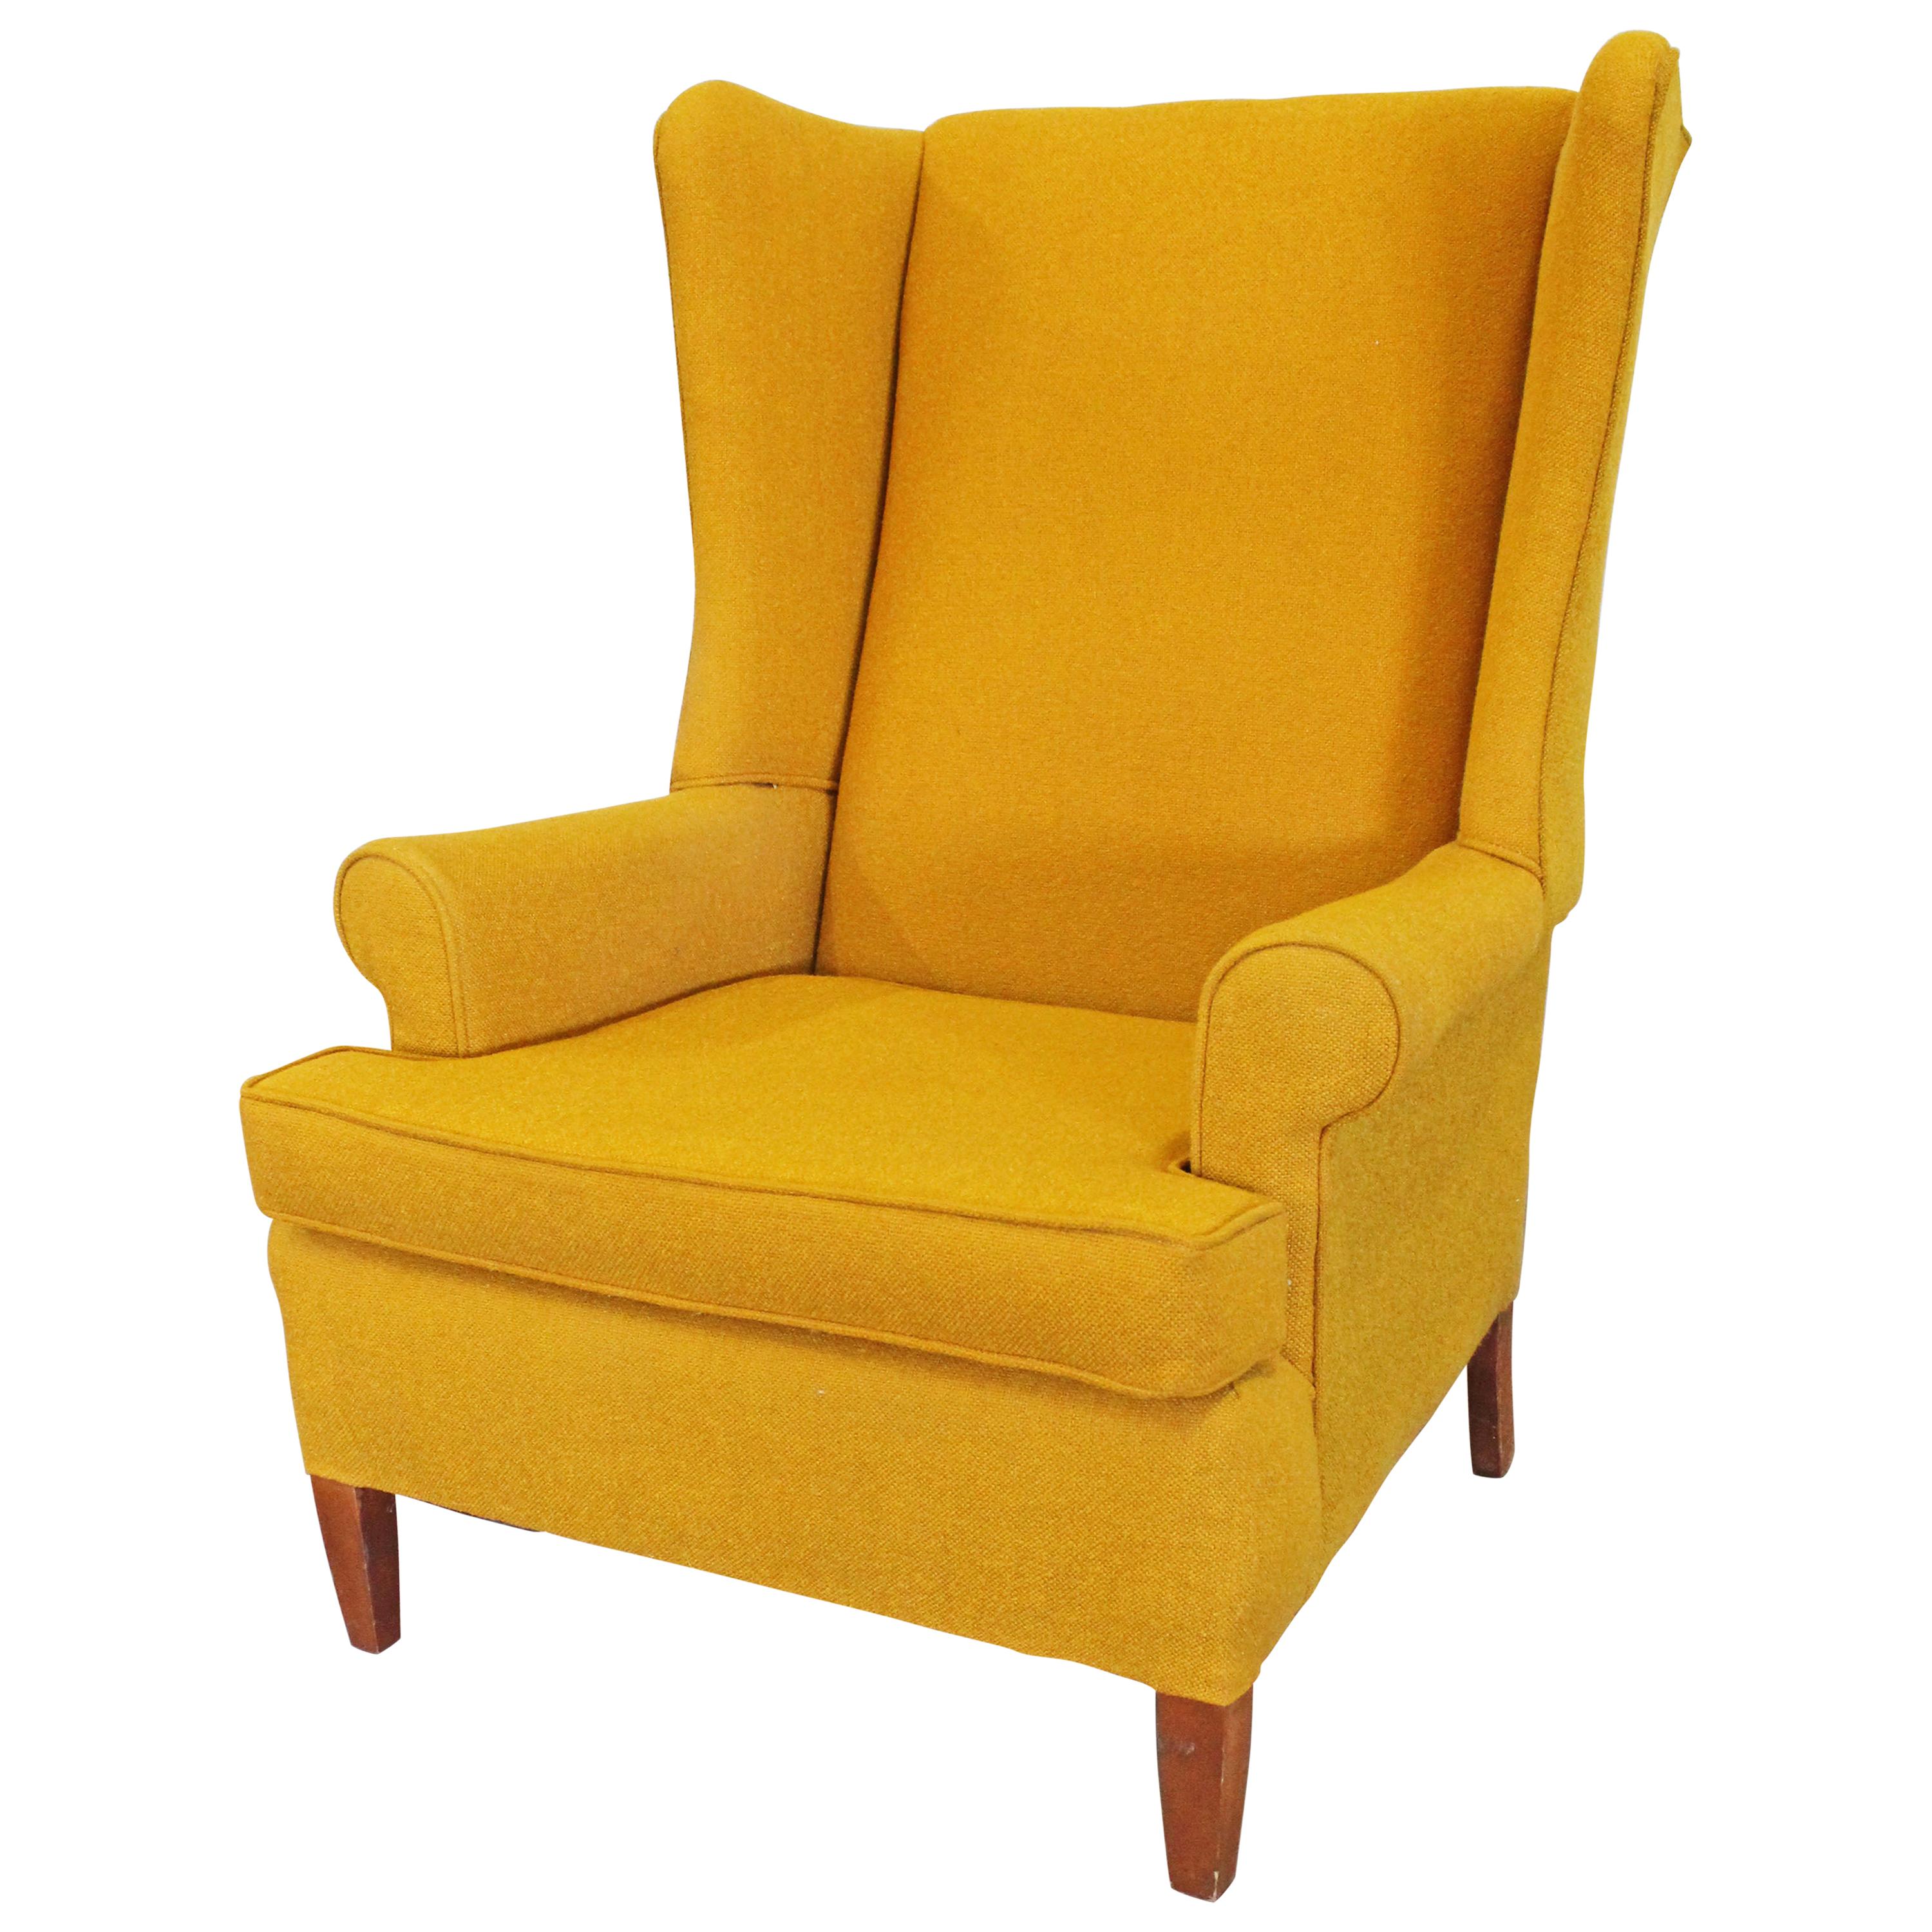 Vintage Mid Century Fireside Wing Back Chair Mustard Yellow 